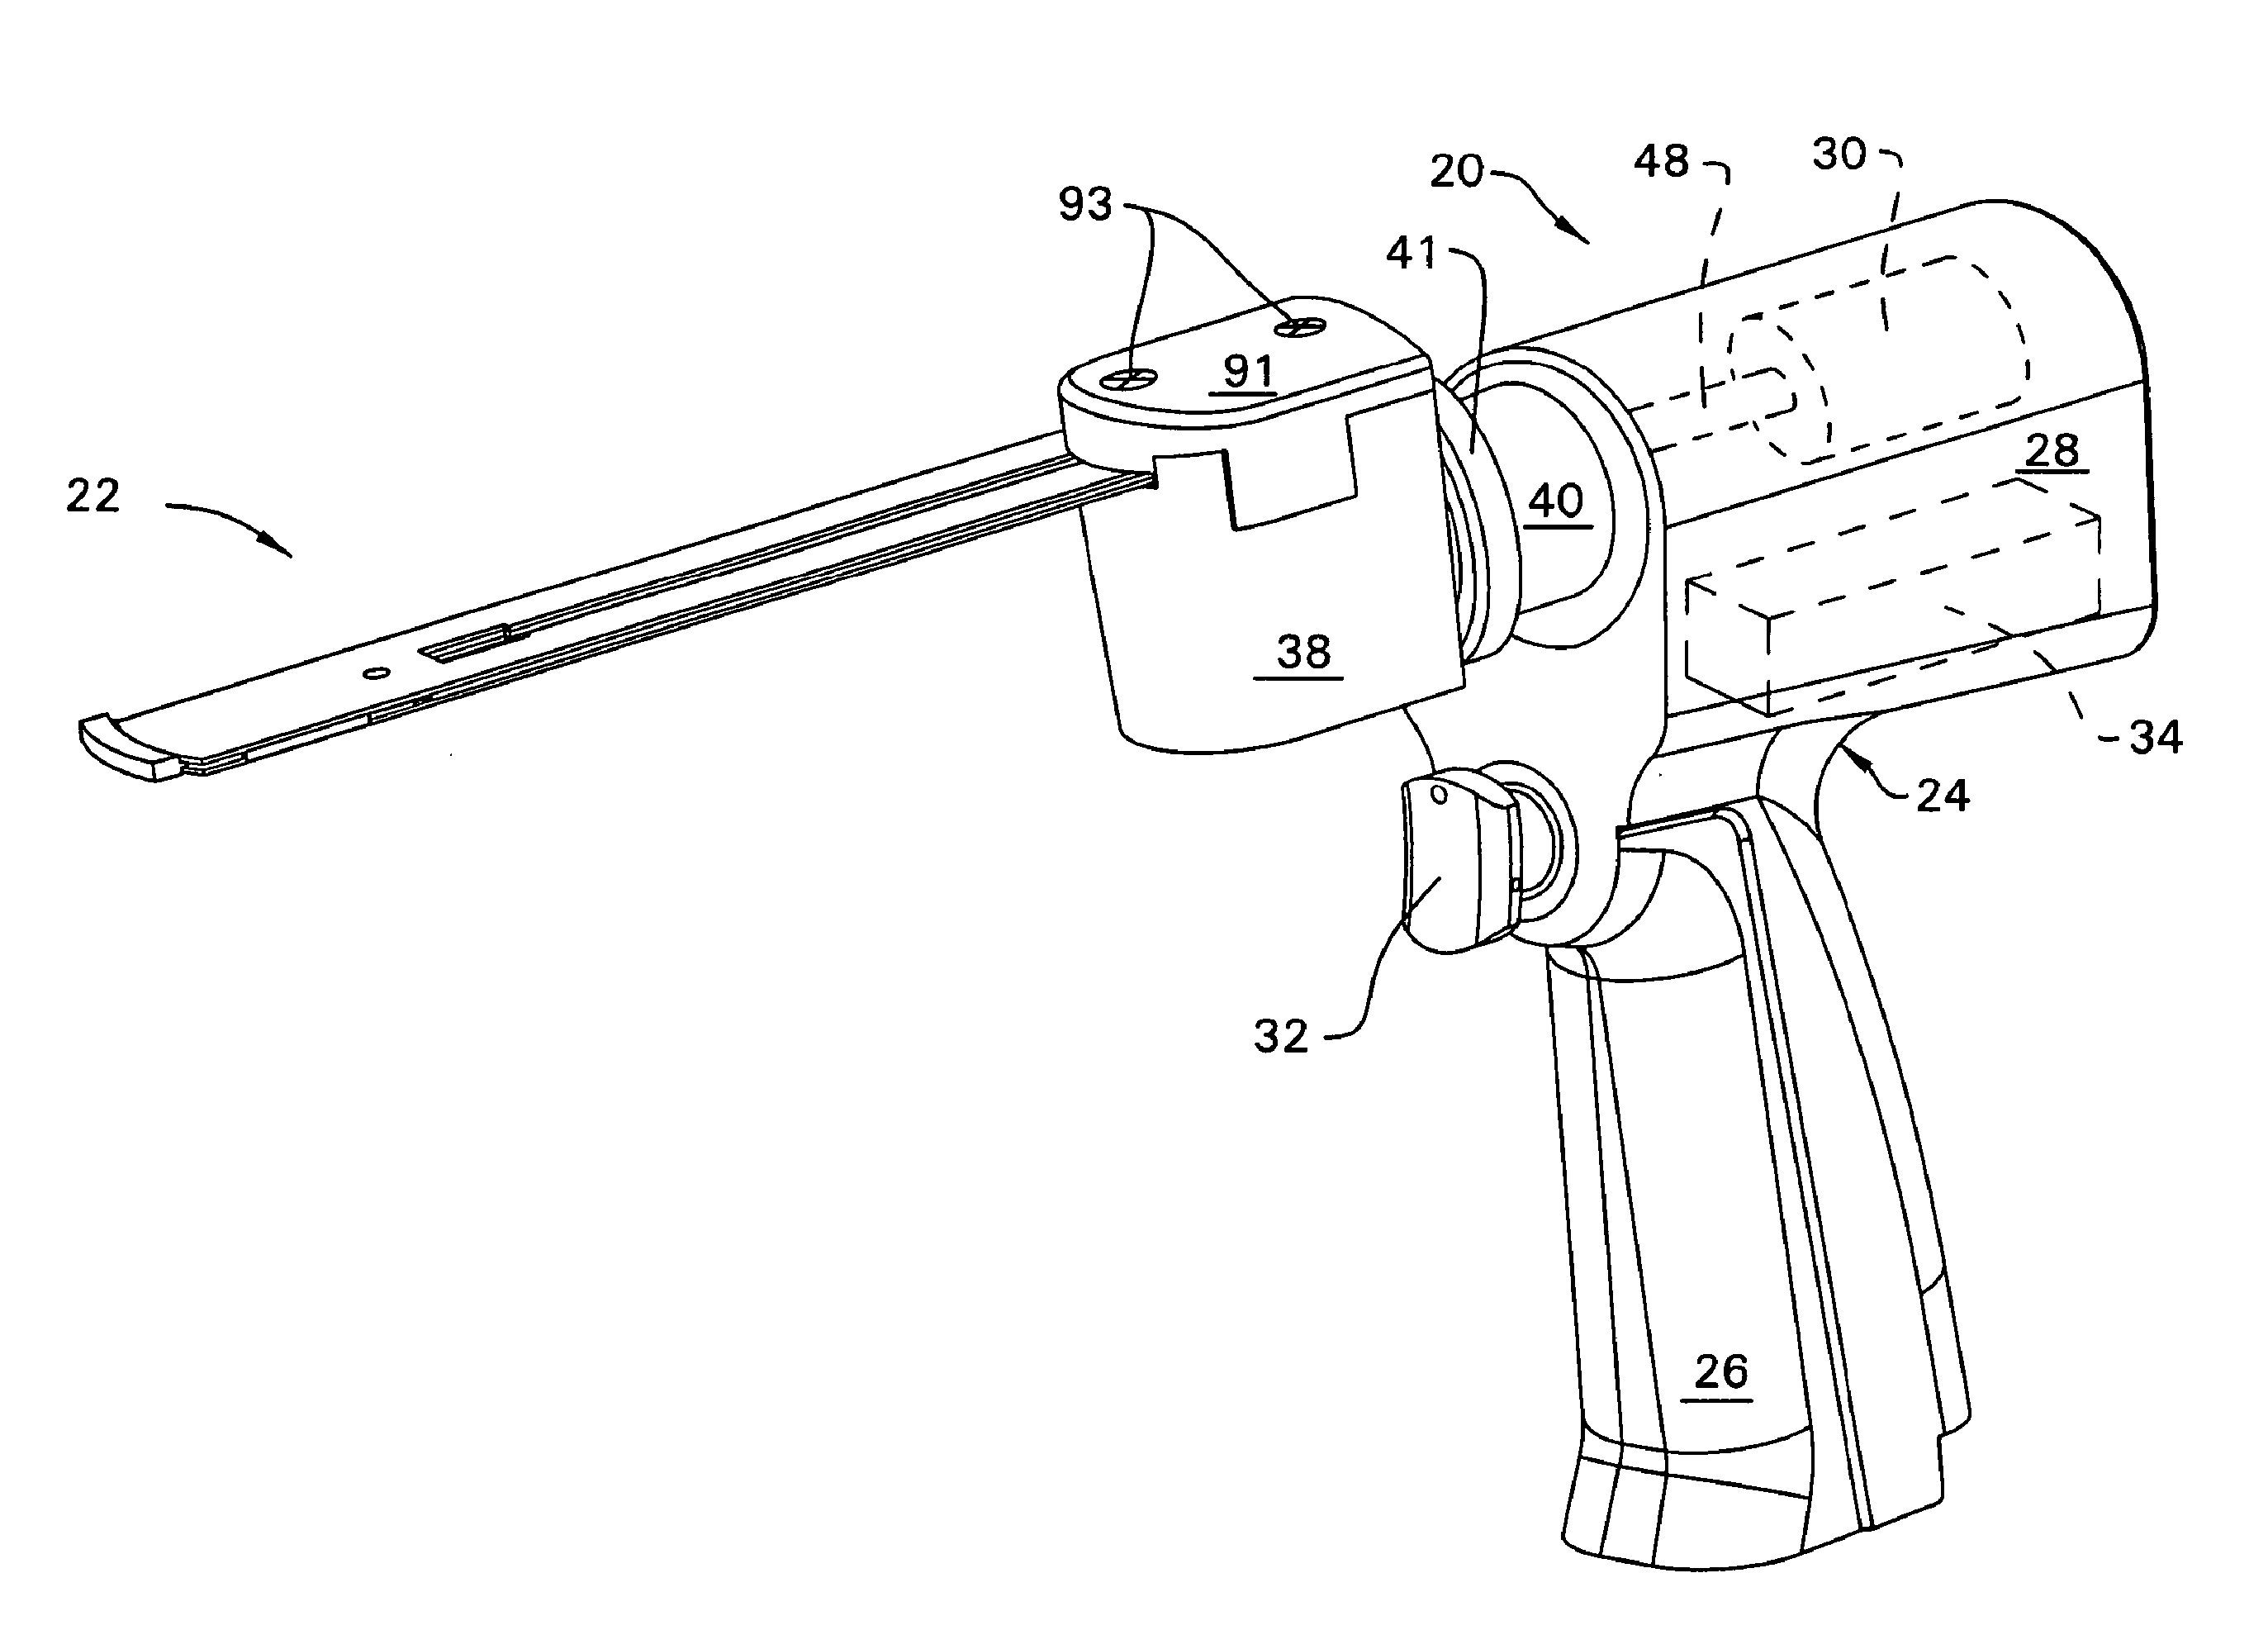 Surgical sagittal saw blade including a guide bar, a blade head and drive rods for pivoting the blade head